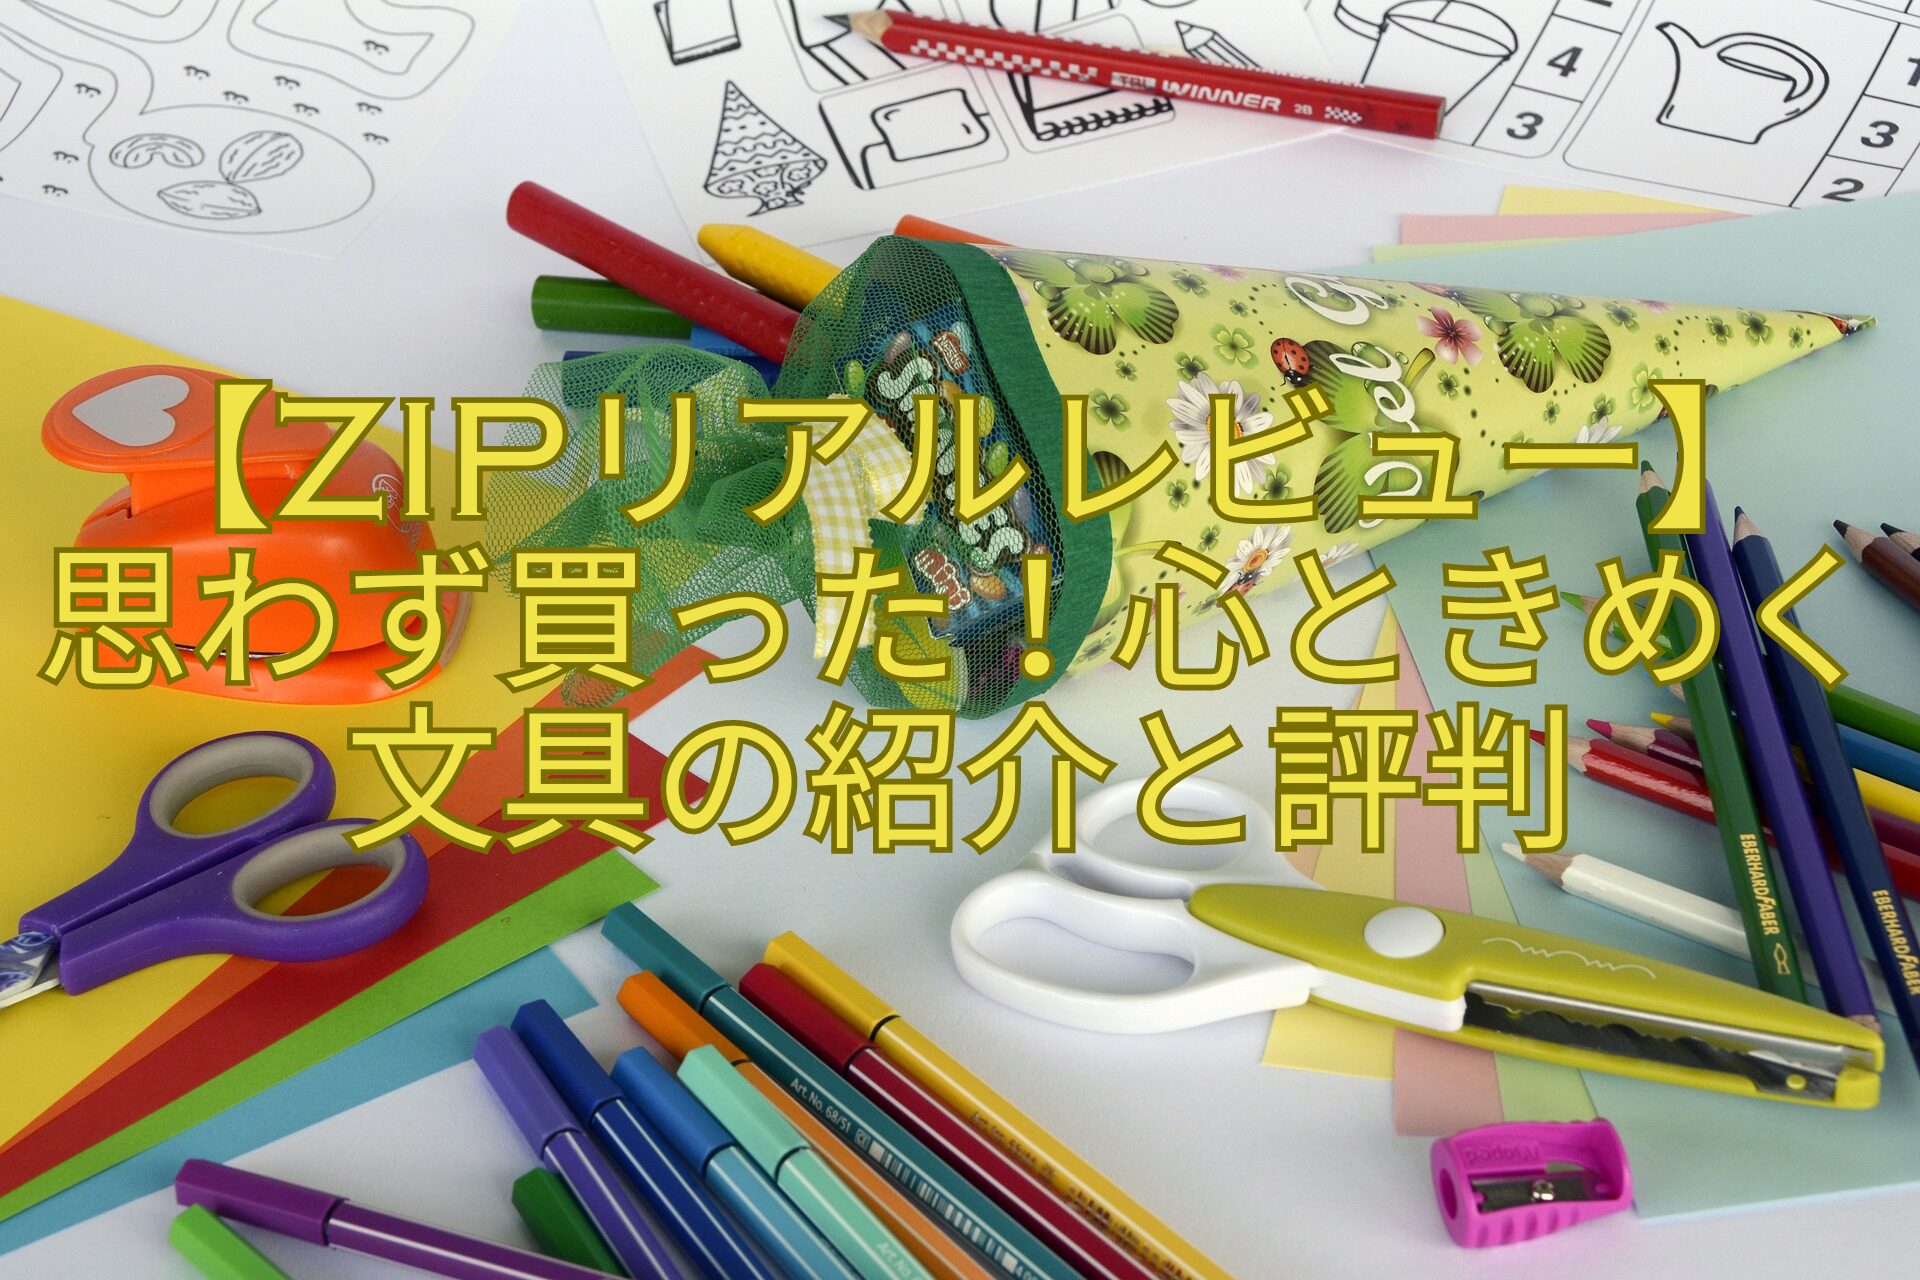 【ZIPリアルレビュー】-思わず買った！心ときめく文具の紹介と評判